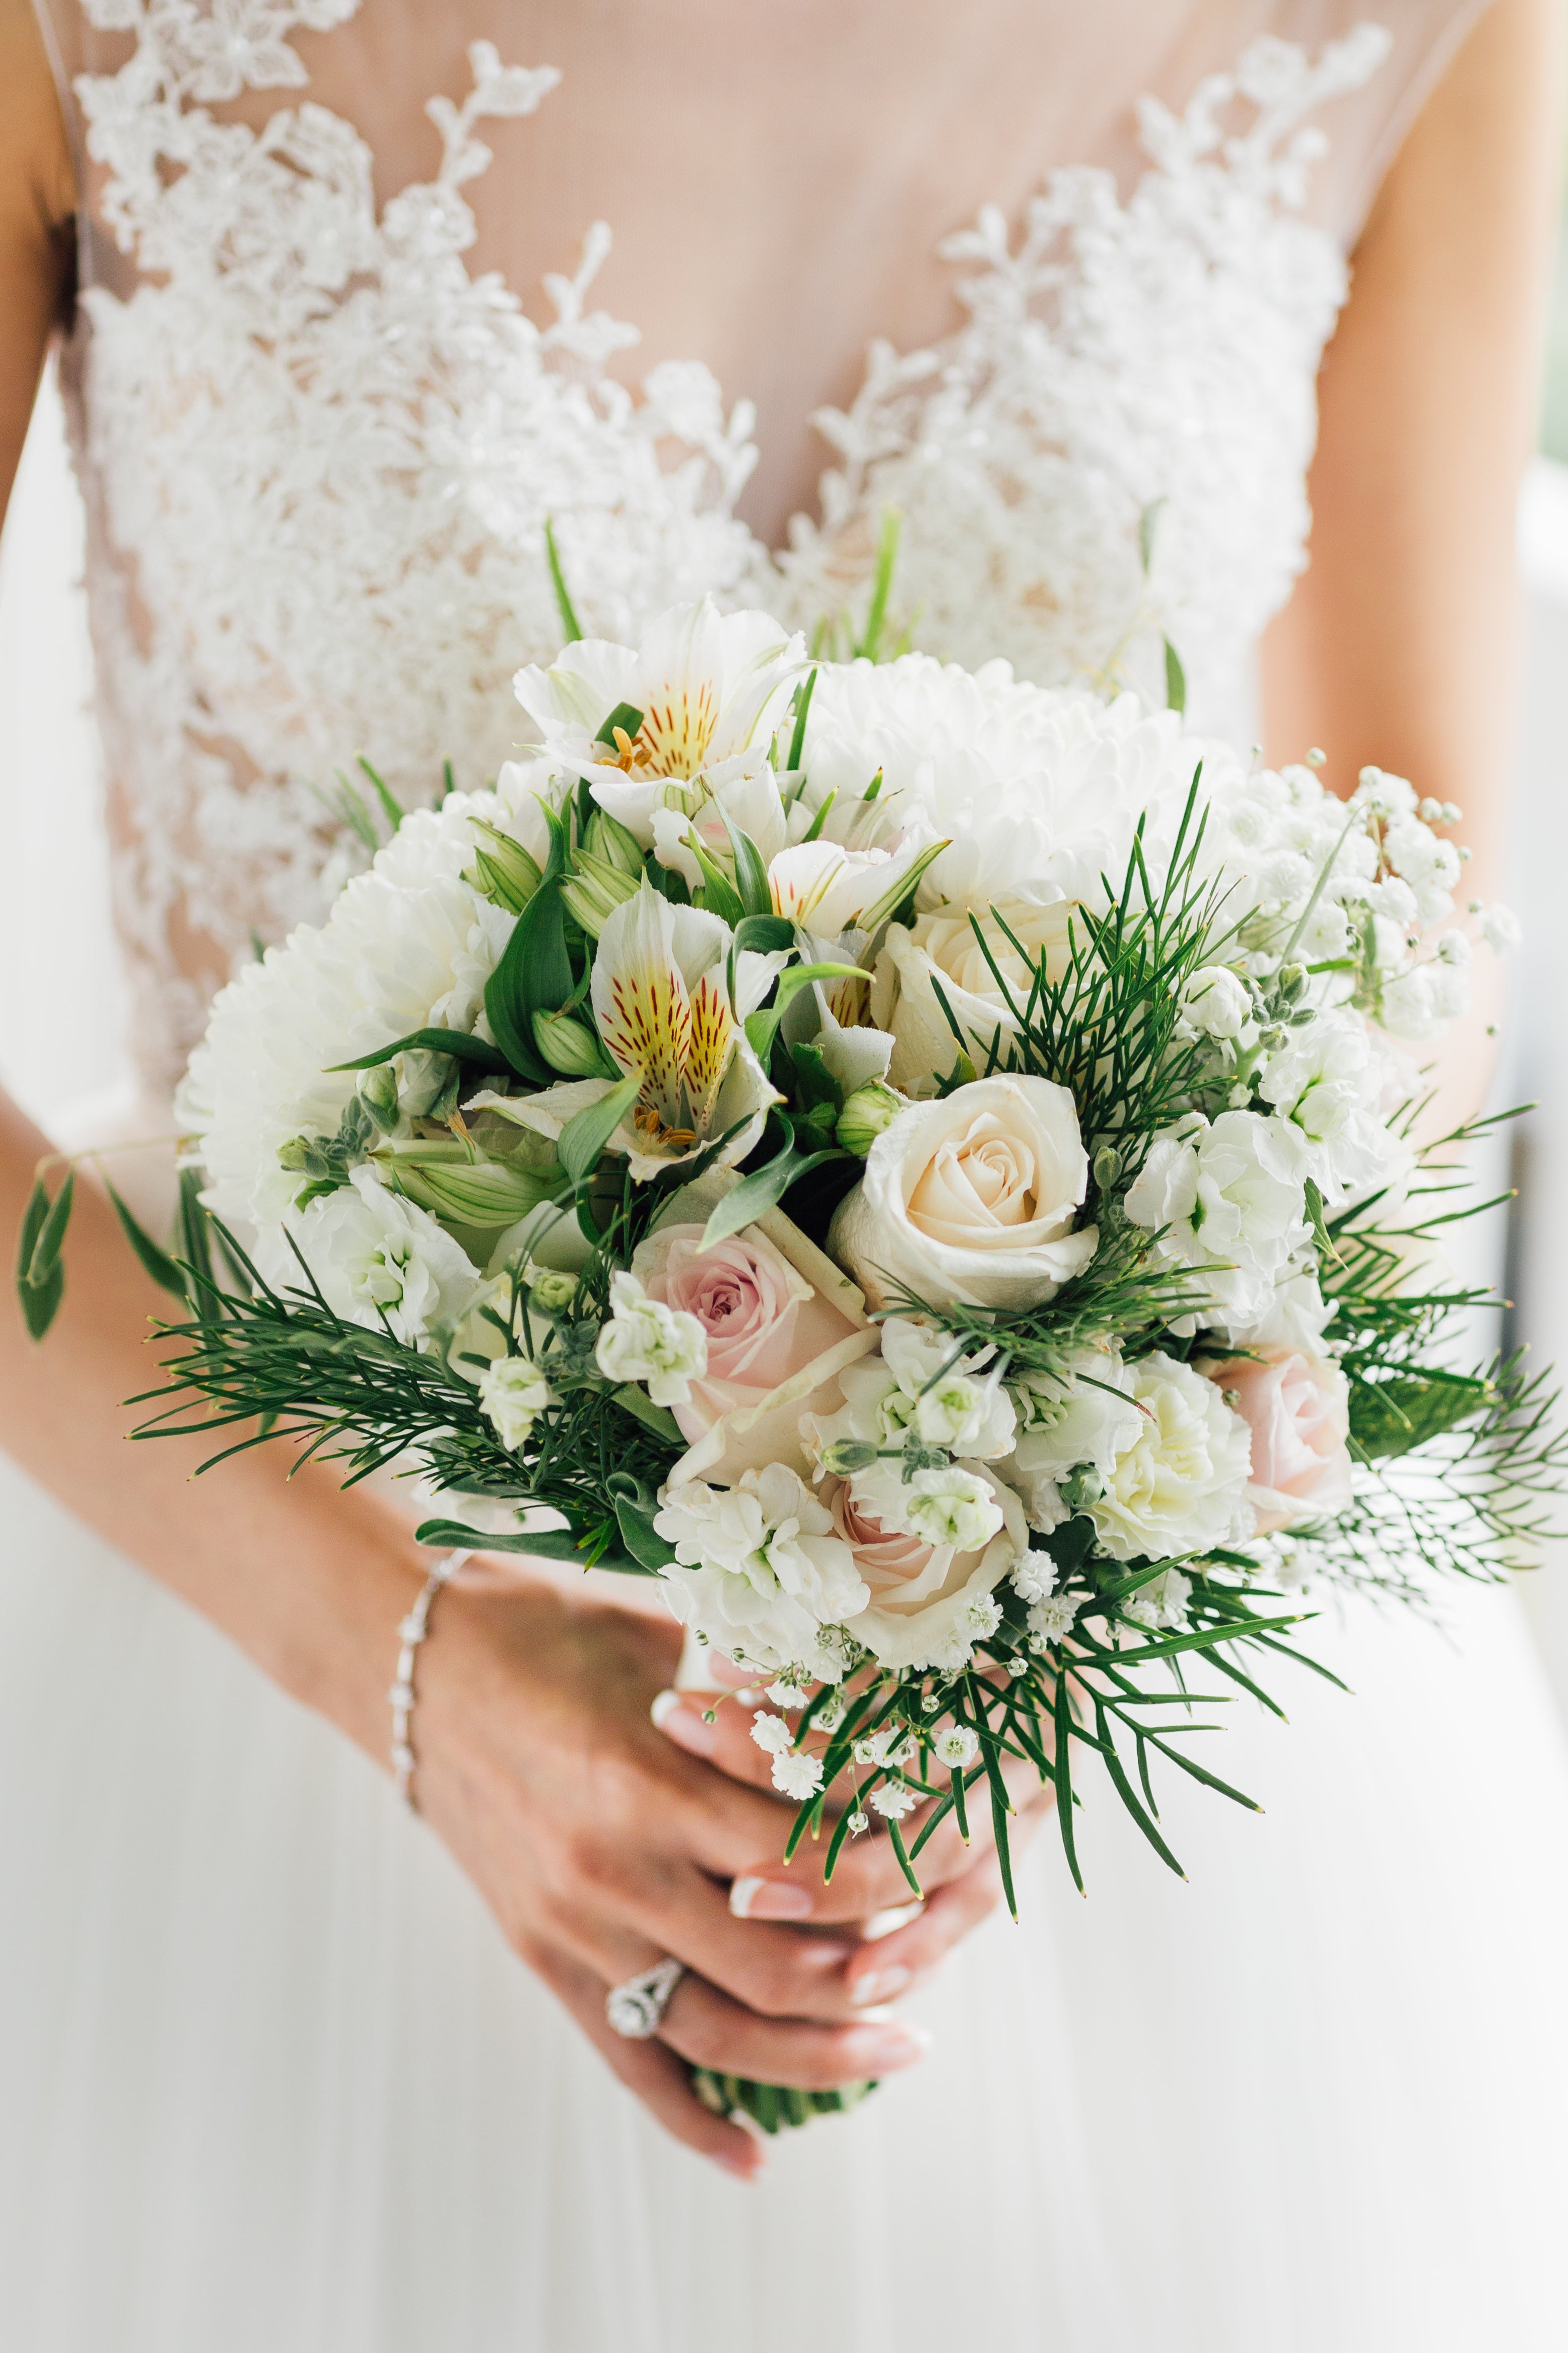 bride in wedding dress made from white lace holding green and white bouquet